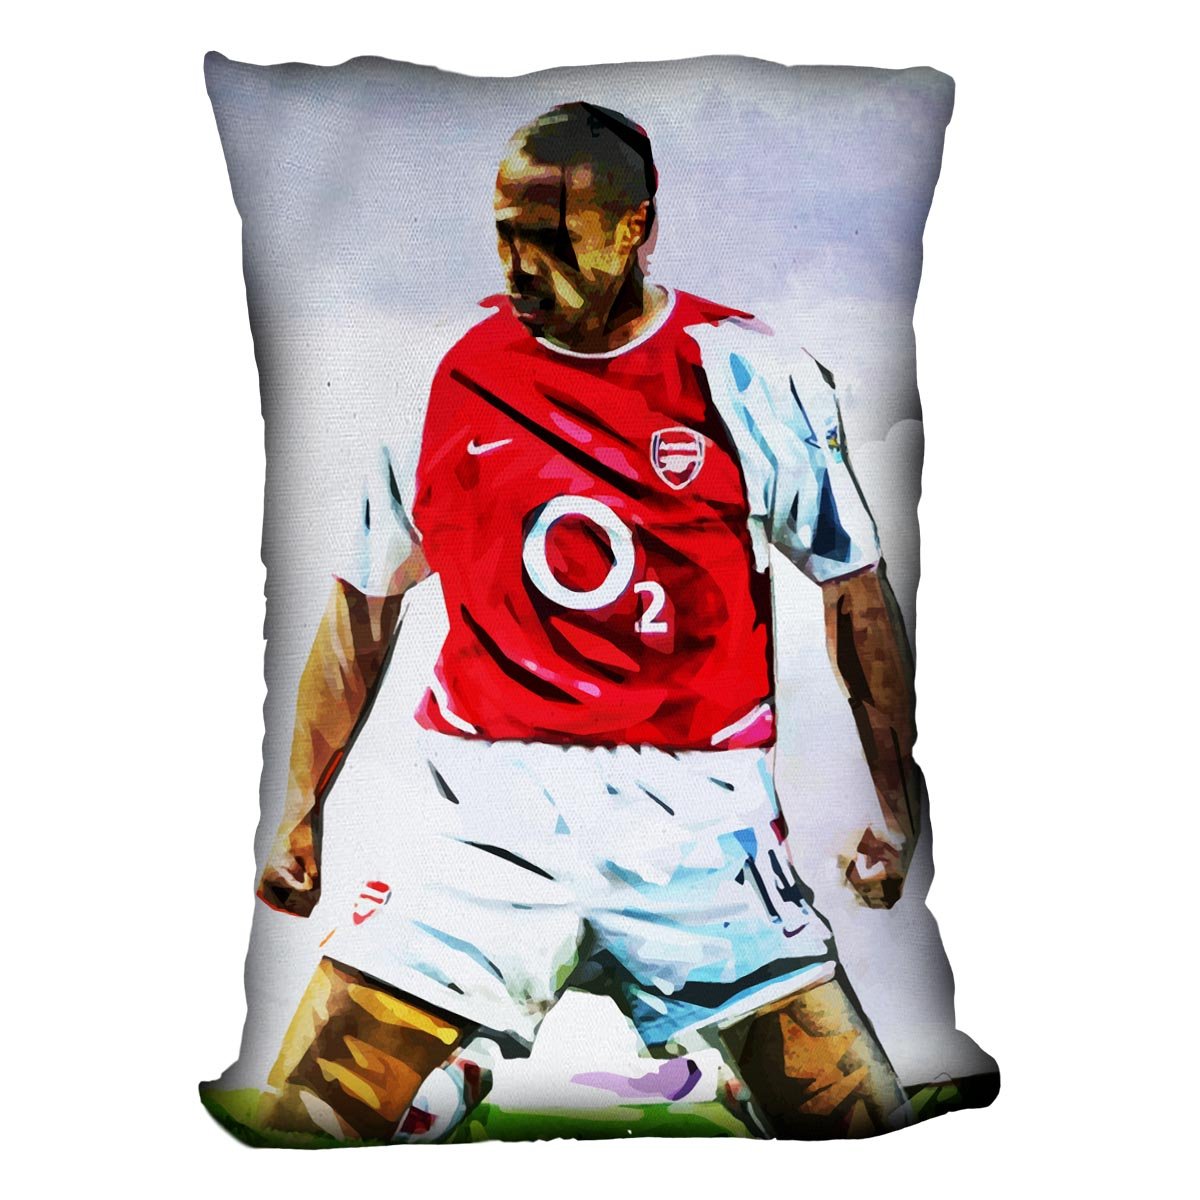 Thierry Henry Kneeslide Cushion